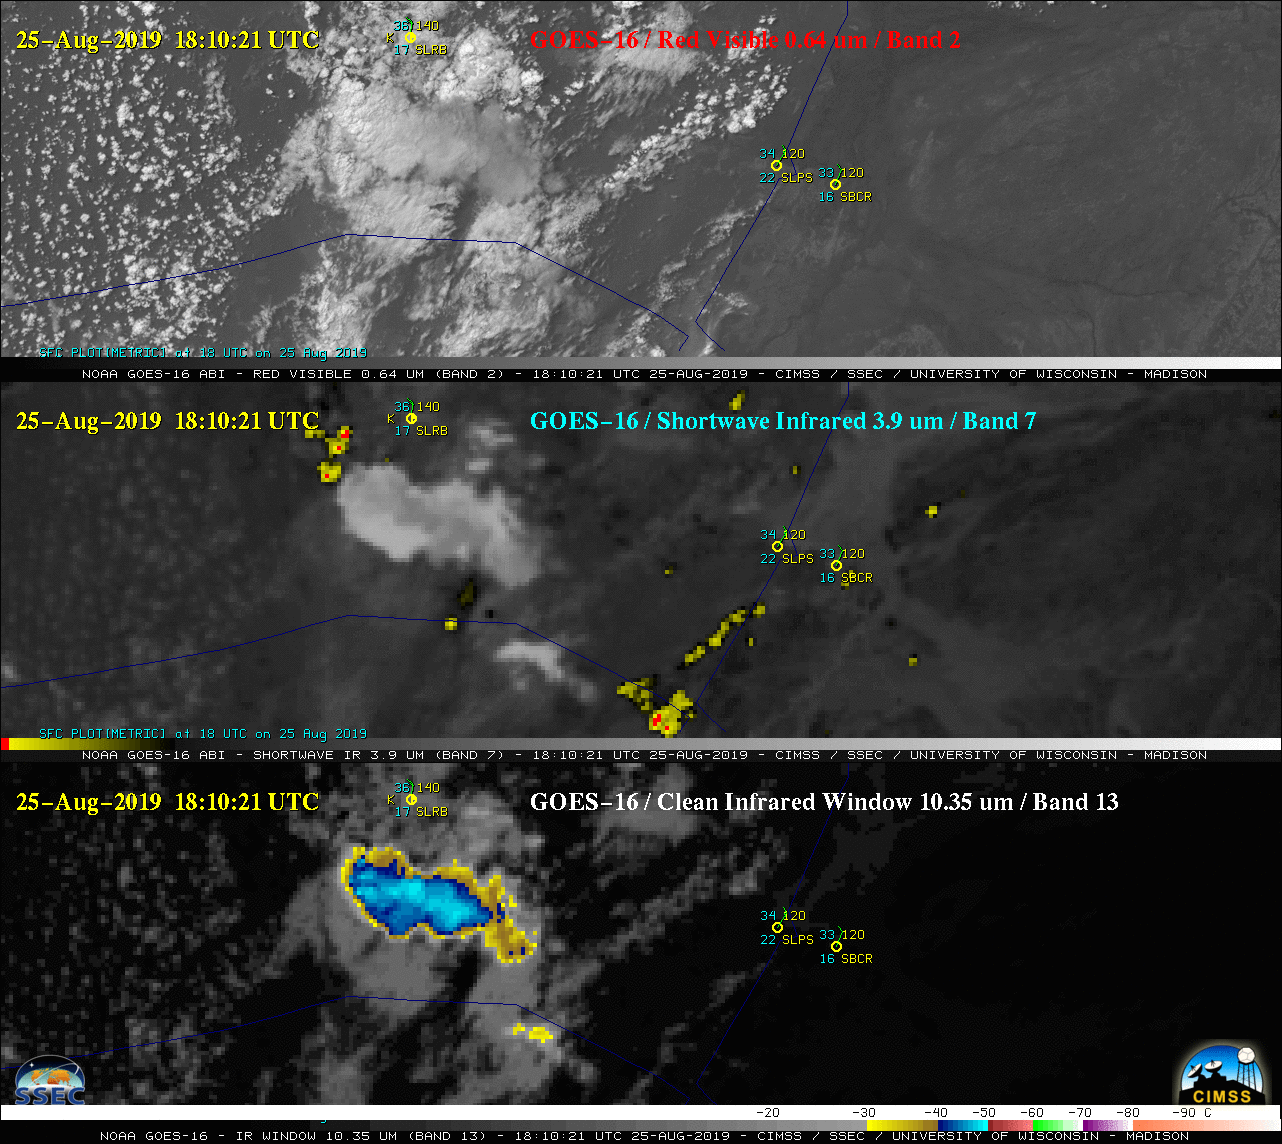 GOES-16 “Red” Visible (0.64 µm, top), Shortwave Infrared (3.9 µm, middle) and “Clean” Infrared Window (10.35 µm, bottom) images [click to play animation | MP4]